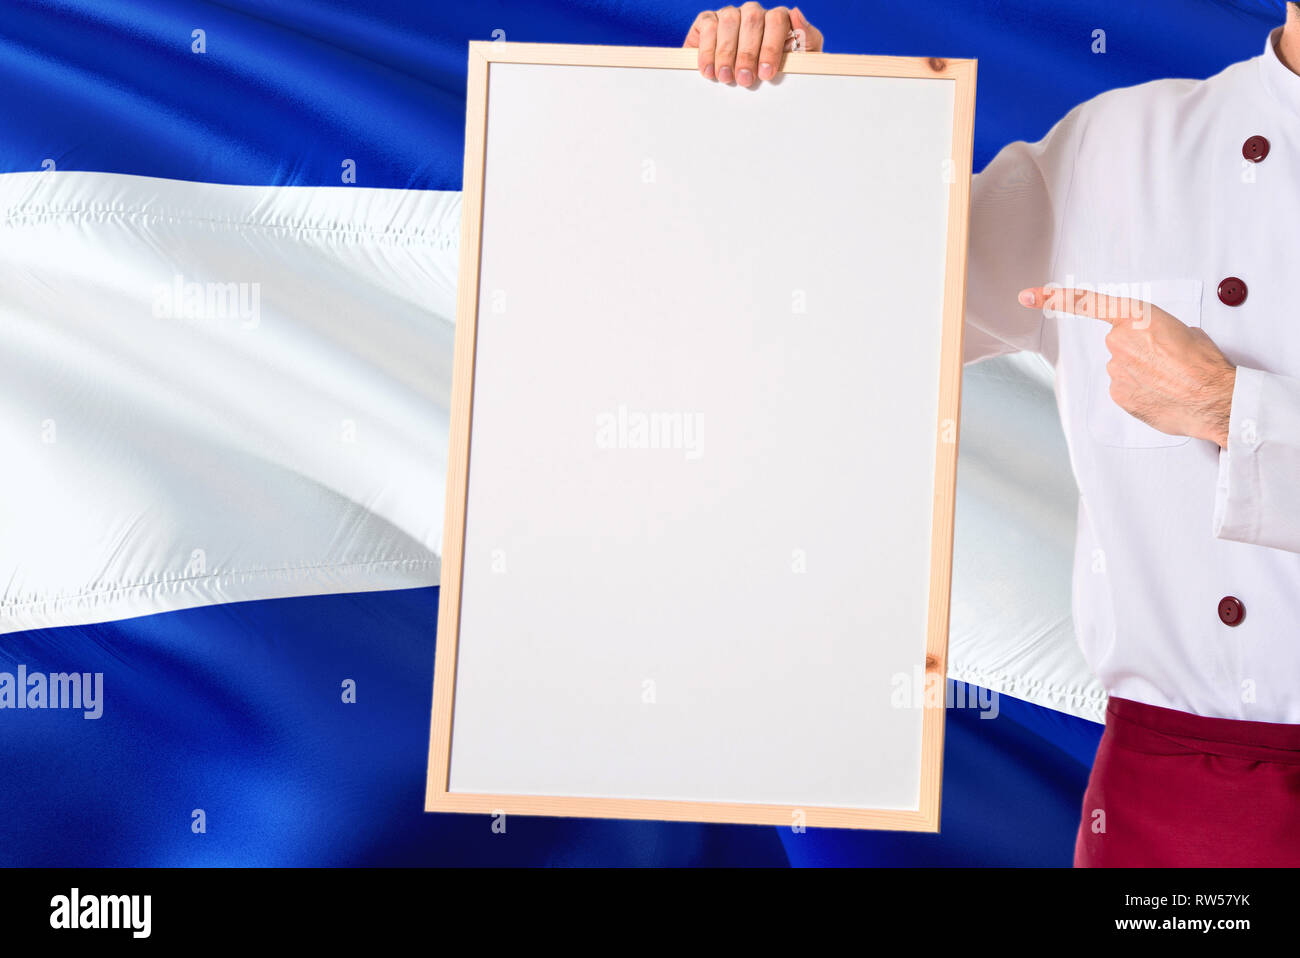 Salvadoran Chef holding blank whiteboard menu on El Salvador flag background. Cook wearing uniform pointing space for text. Stock Photo